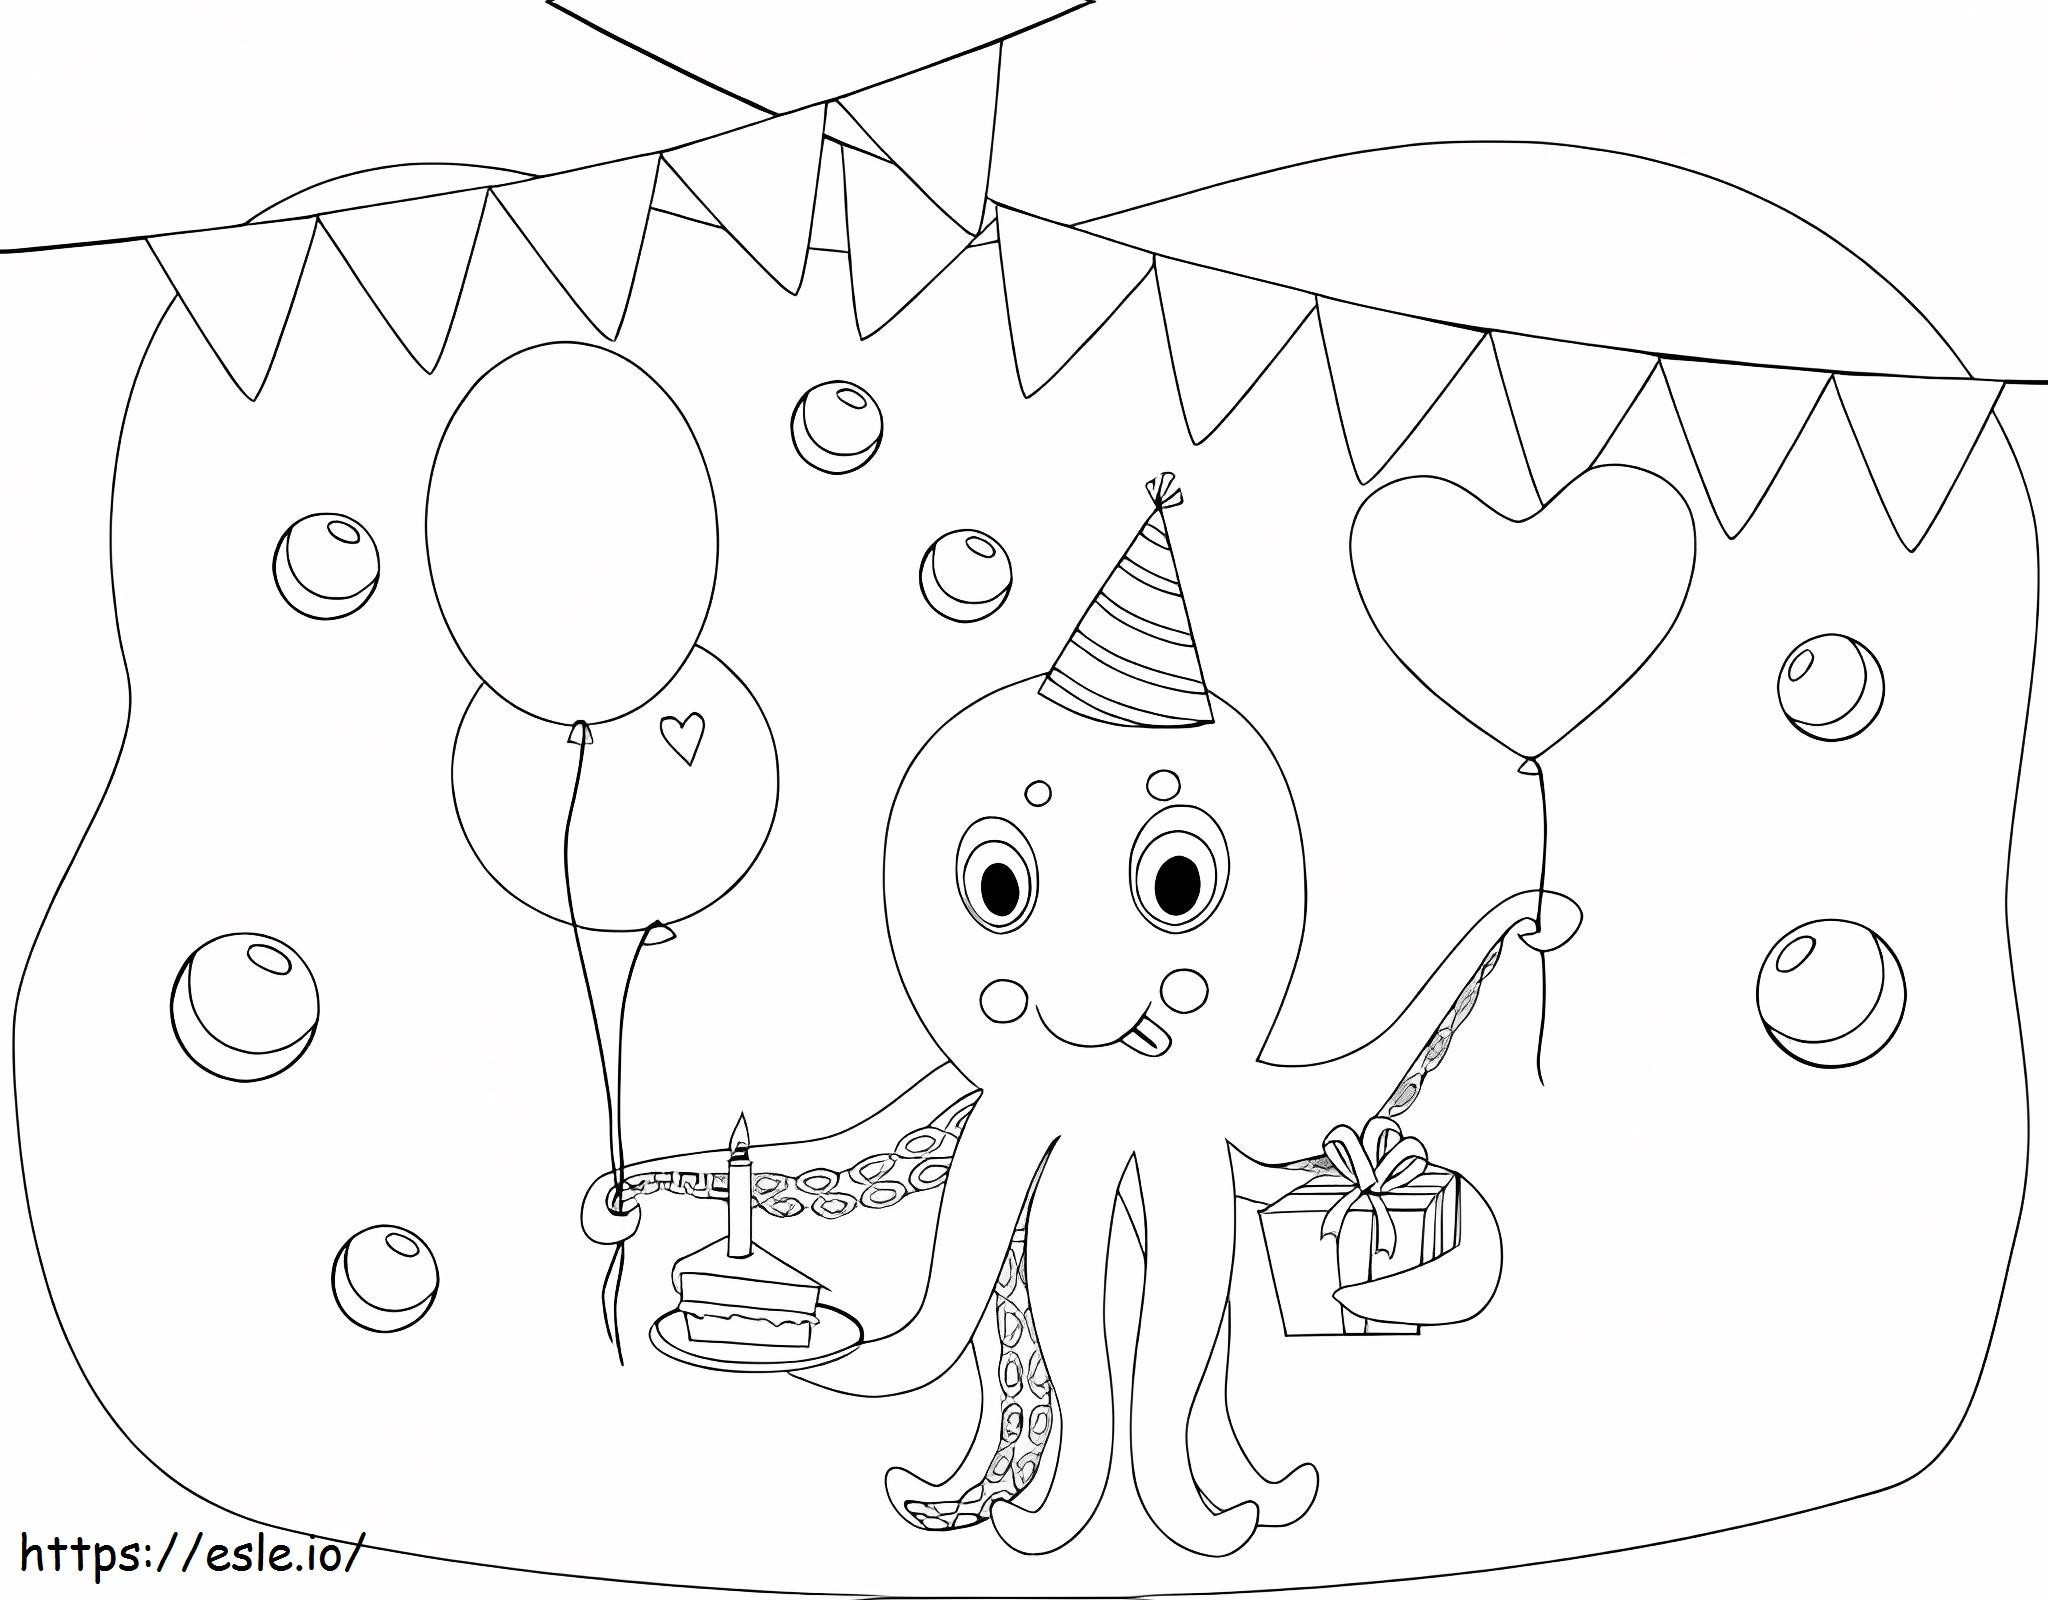 Octopus Birthday coloring page